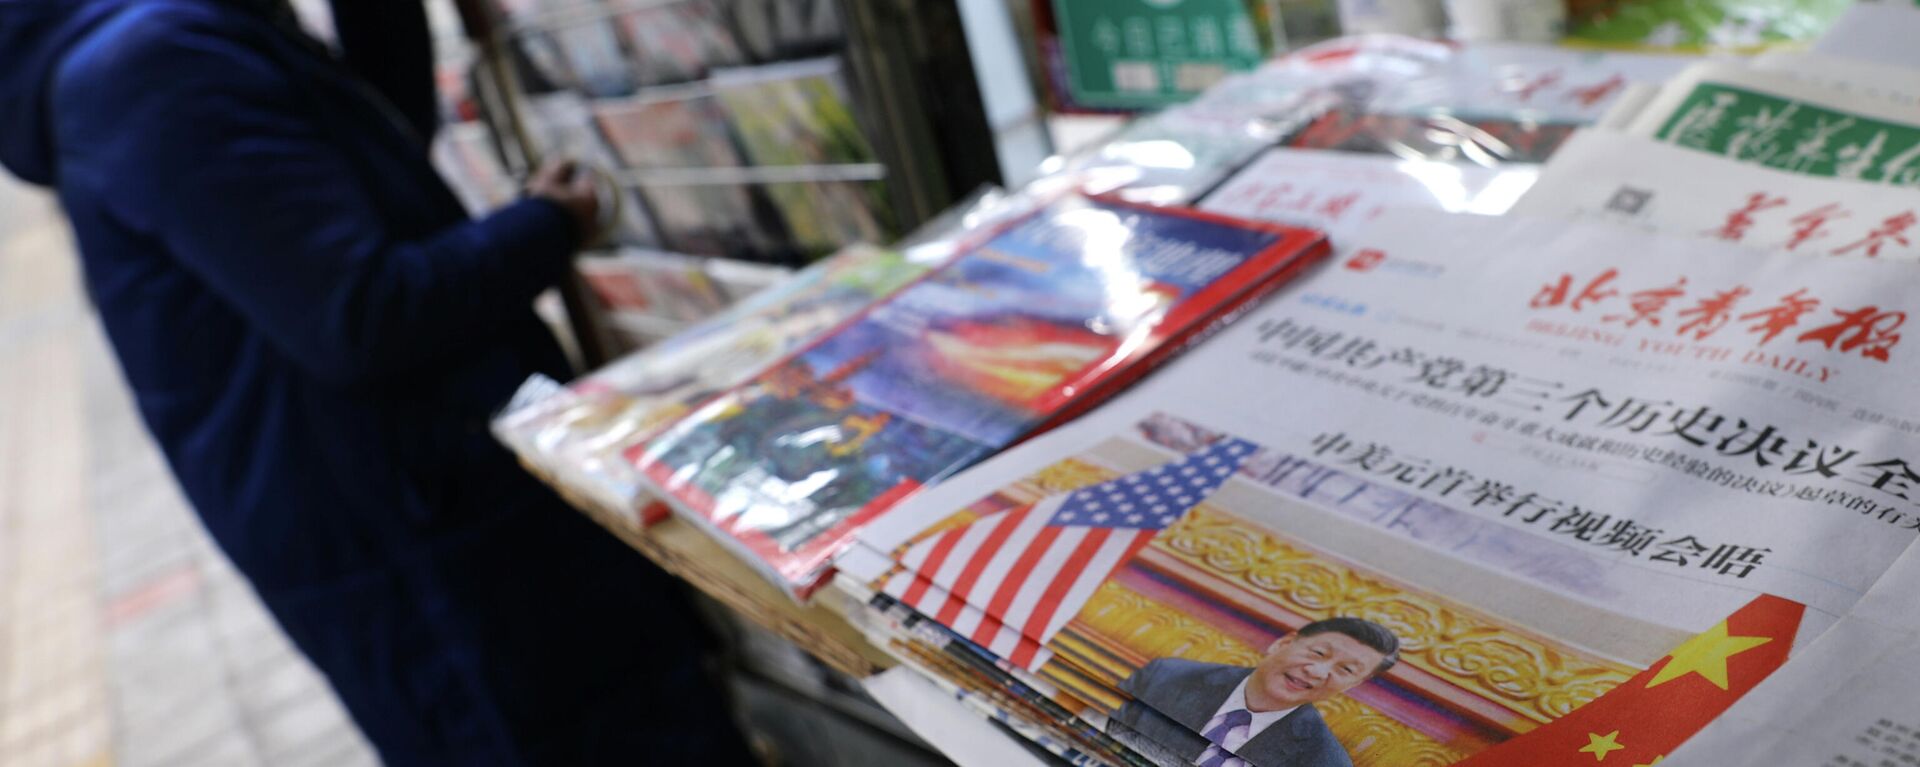 A picture of Chinese President Xi Jinping attending a virtual meeting with U.S. President Joe Biden via video link is seen on a newspaper front-page, at a newsstand in Beijing, China, November 17, 2021. - Sputnik International, 1920, 18.11.2021